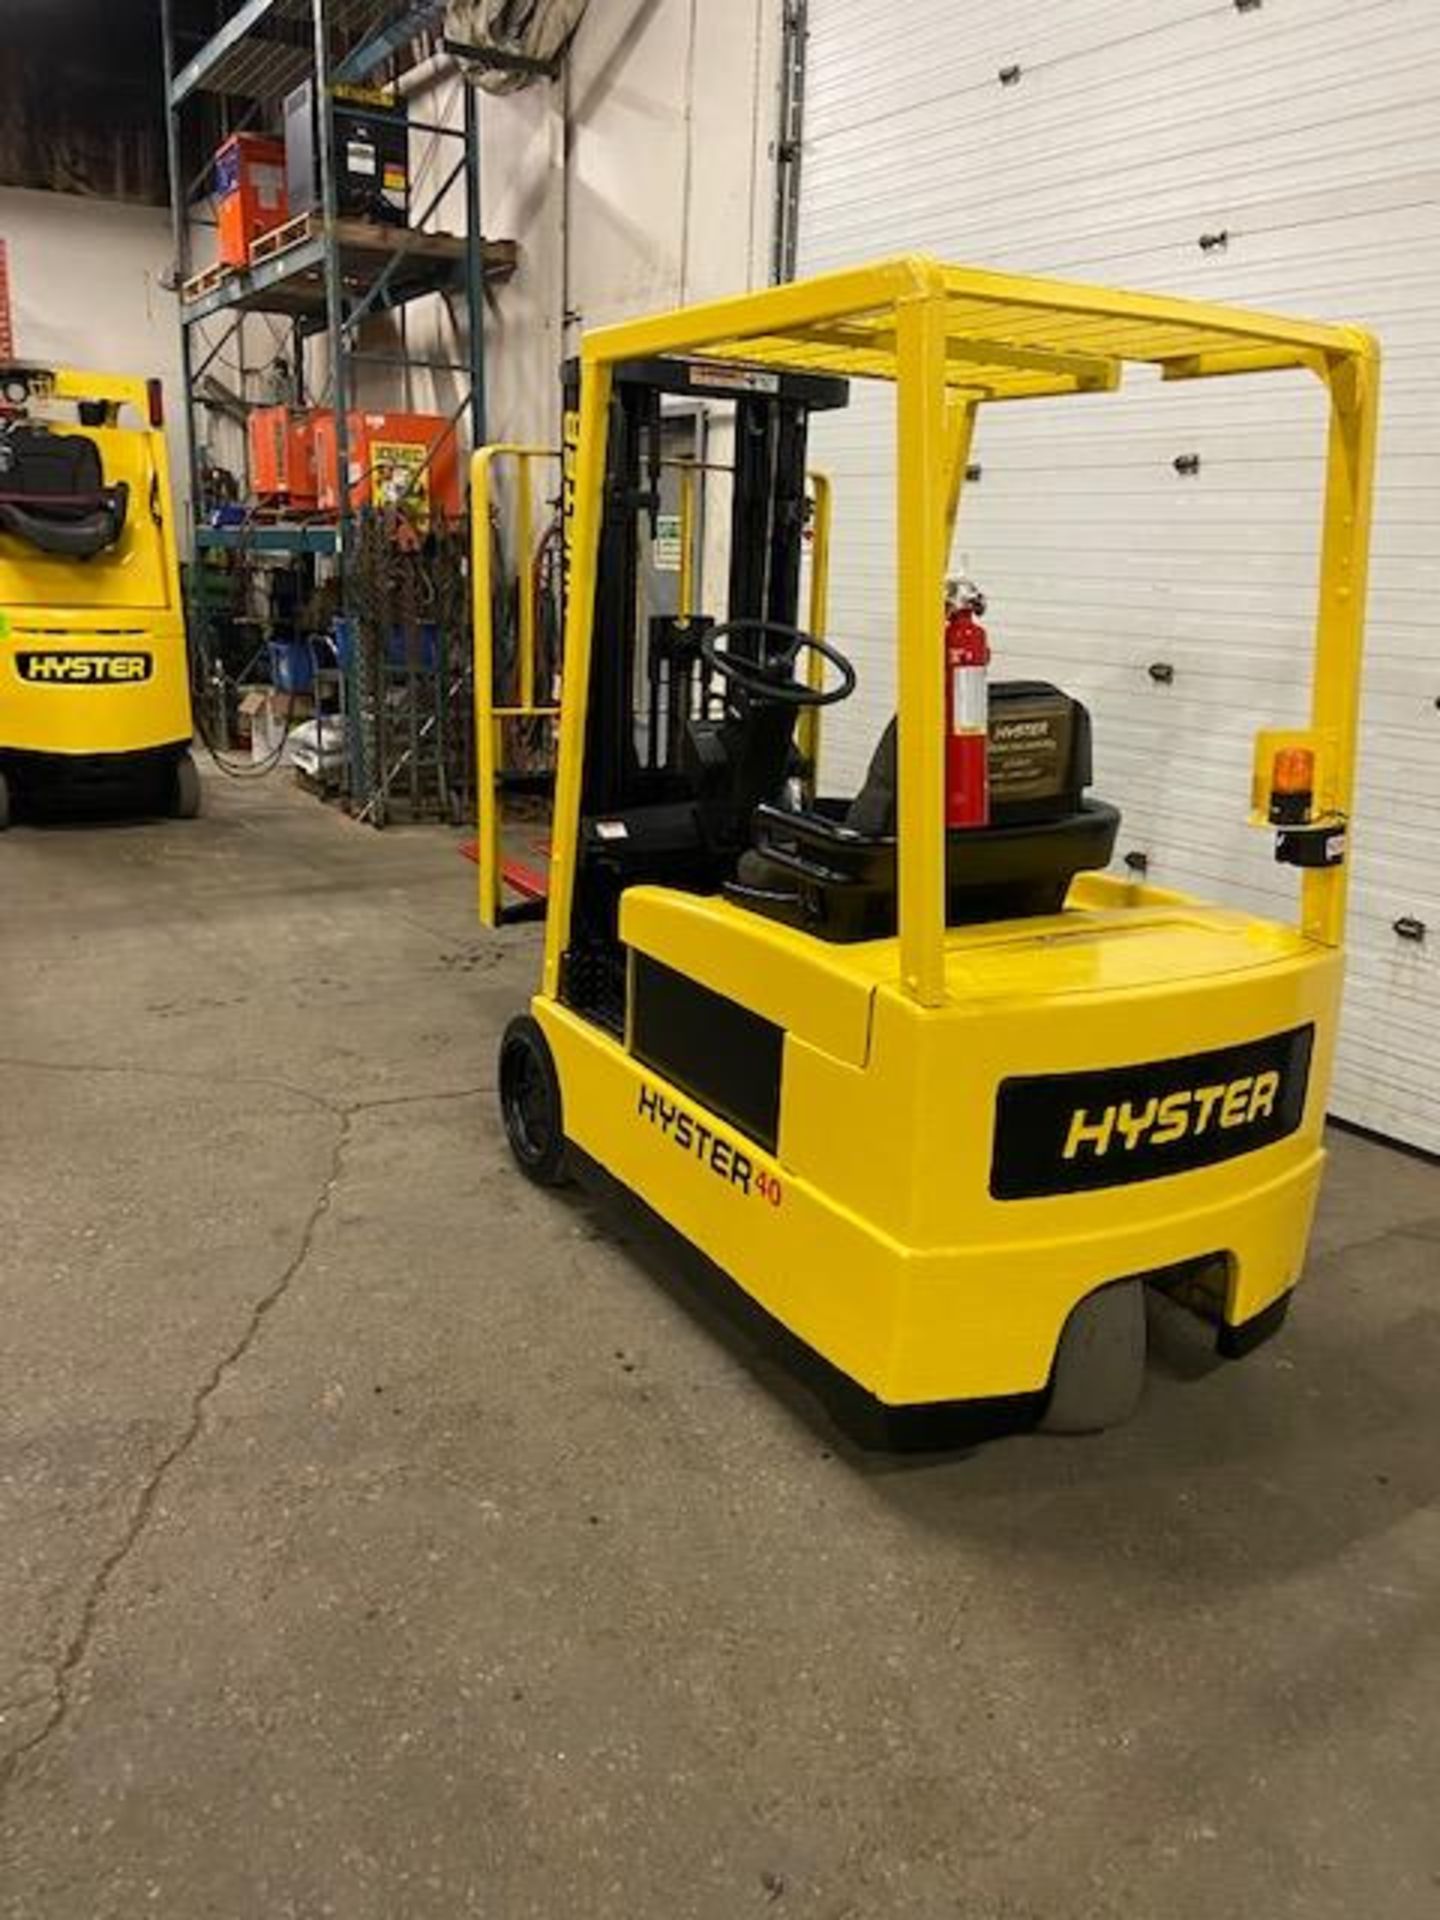 FREE CUSTOMS - Hyster 4000lbs Capacity 3-wheel Forklift Electric with 3-stage mast & LOW HOURS - Image 3 of 3